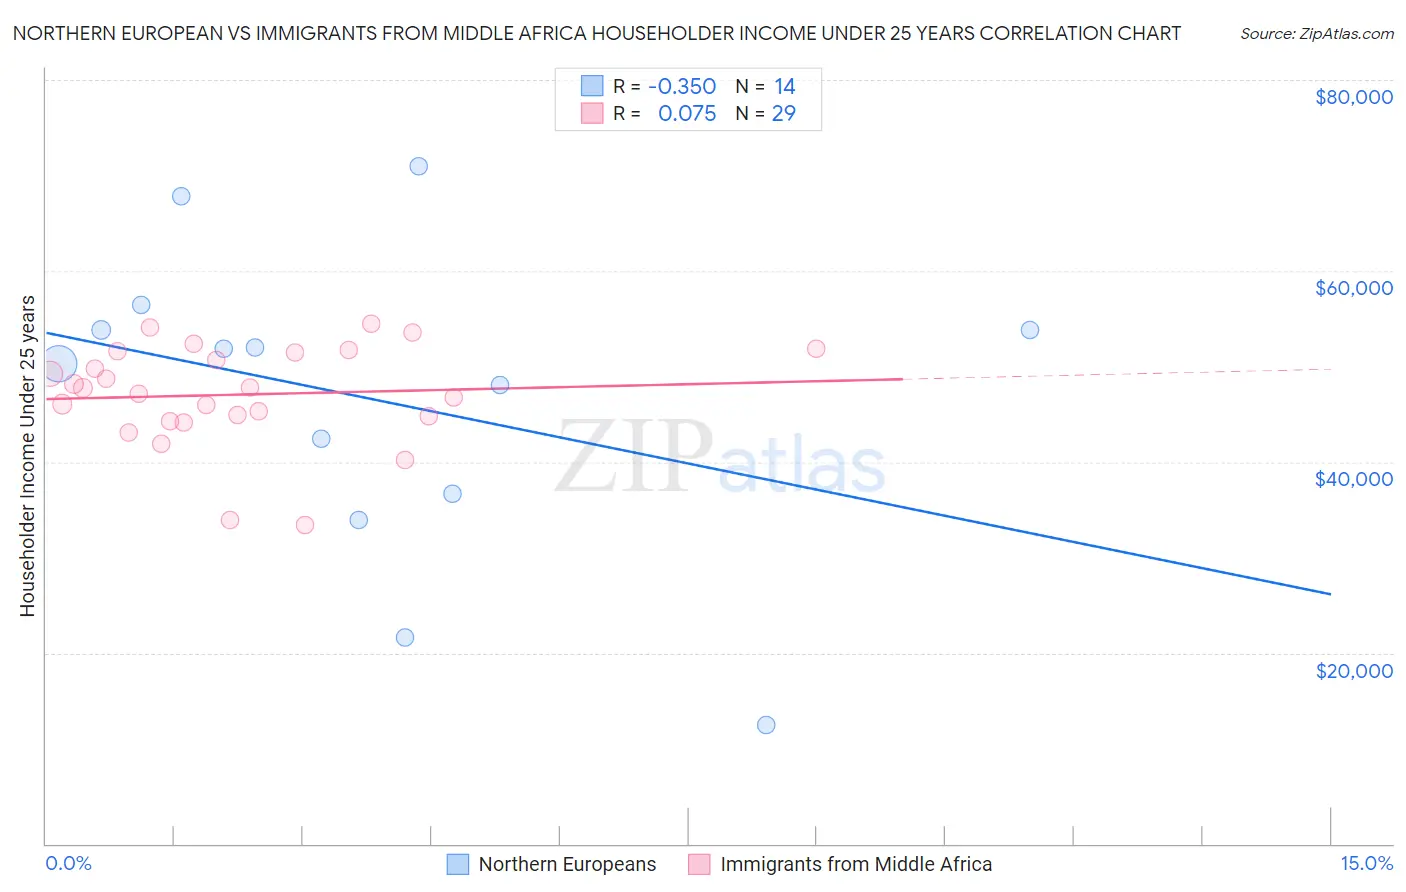 Northern European vs Immigrants from Middle Africa Householder Income Under 25 years